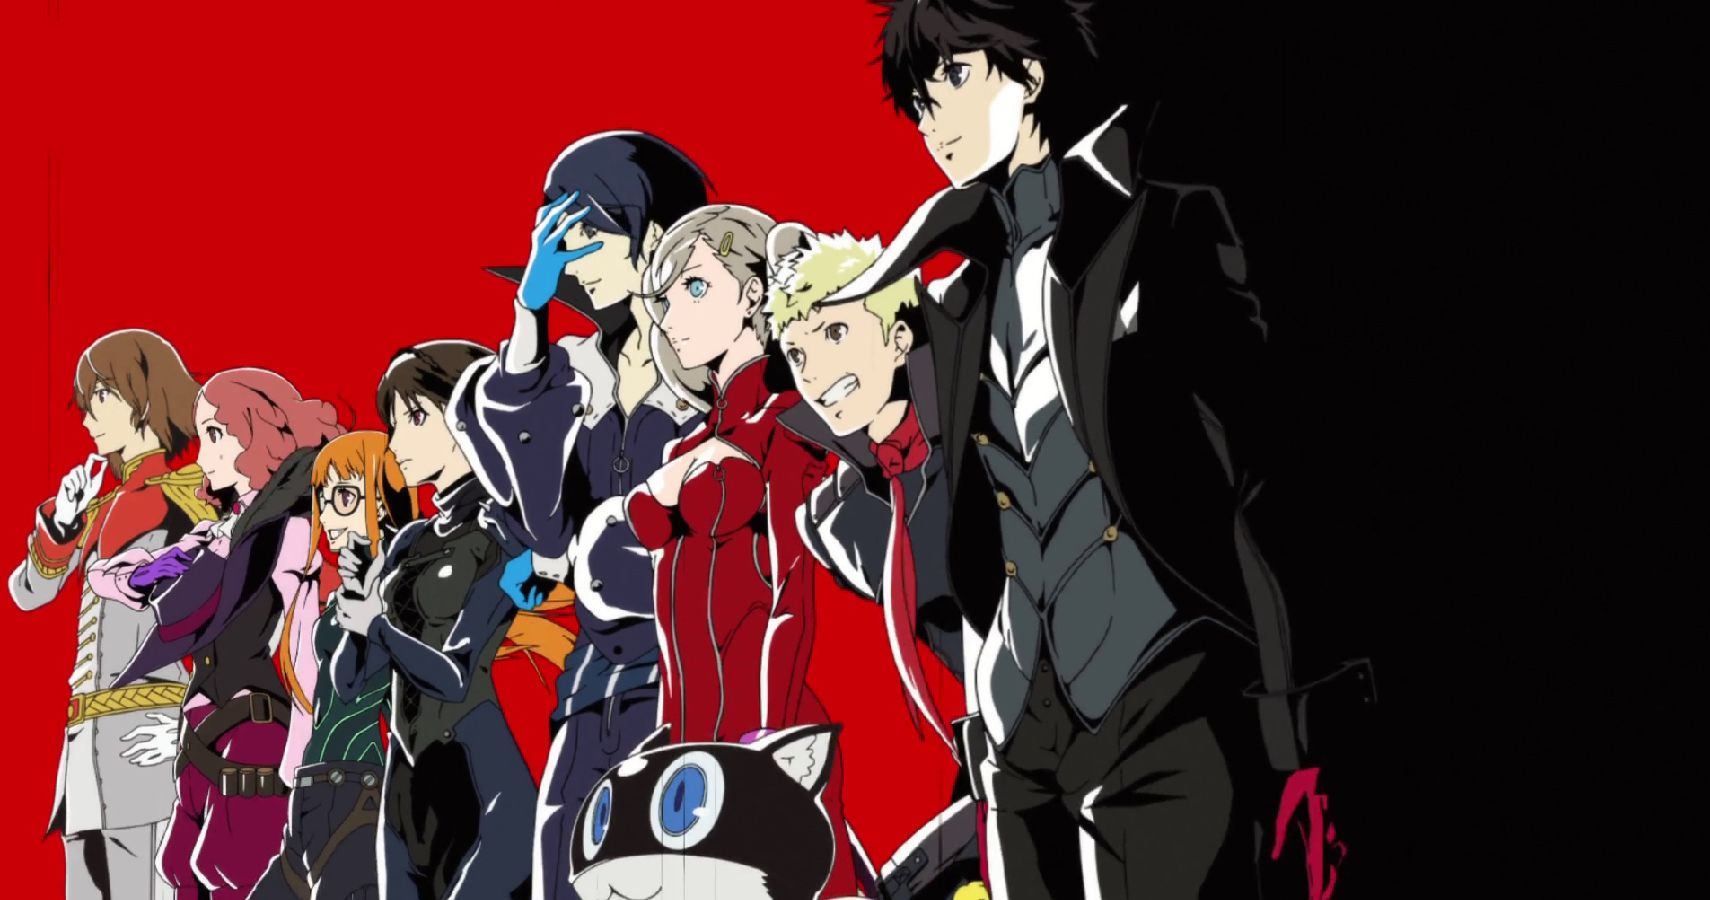 Persona 5 characters standing side by side